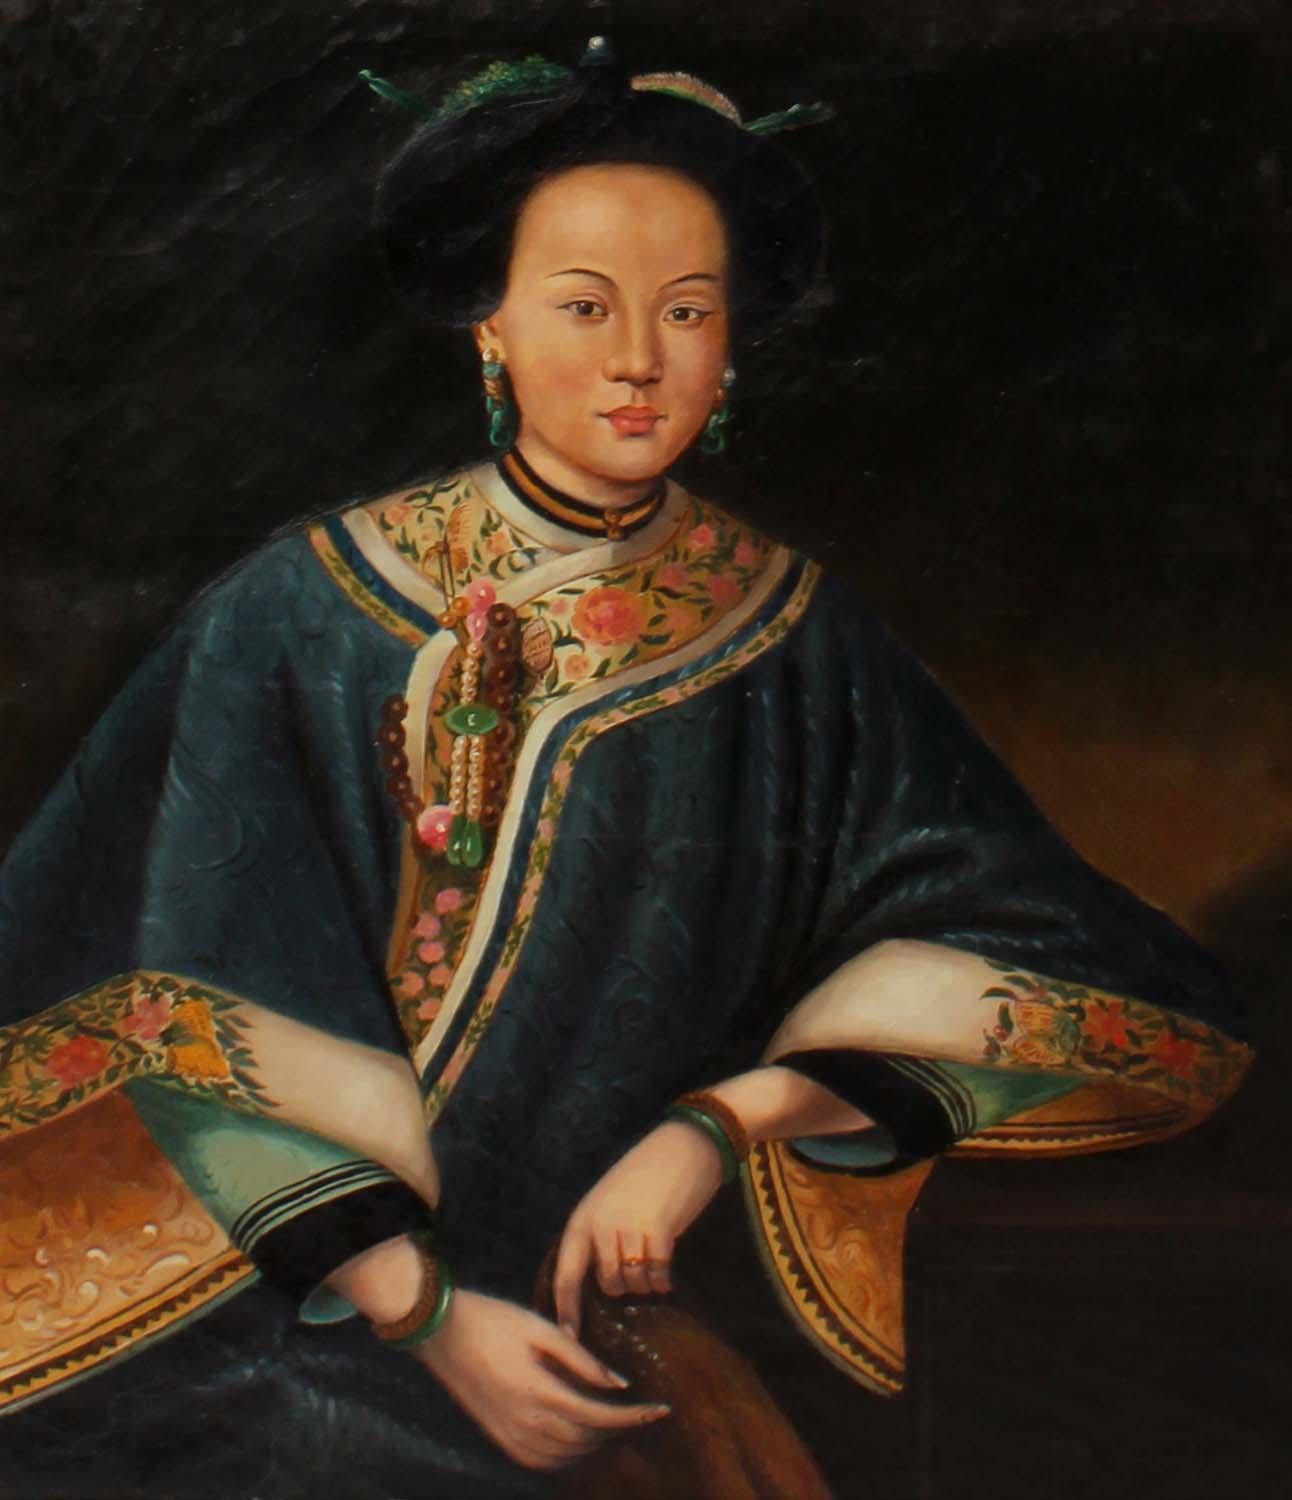 Early 20th Century Realist Portrait of an Asian Woman in a Decorative Kimono  - Painting by Unknown